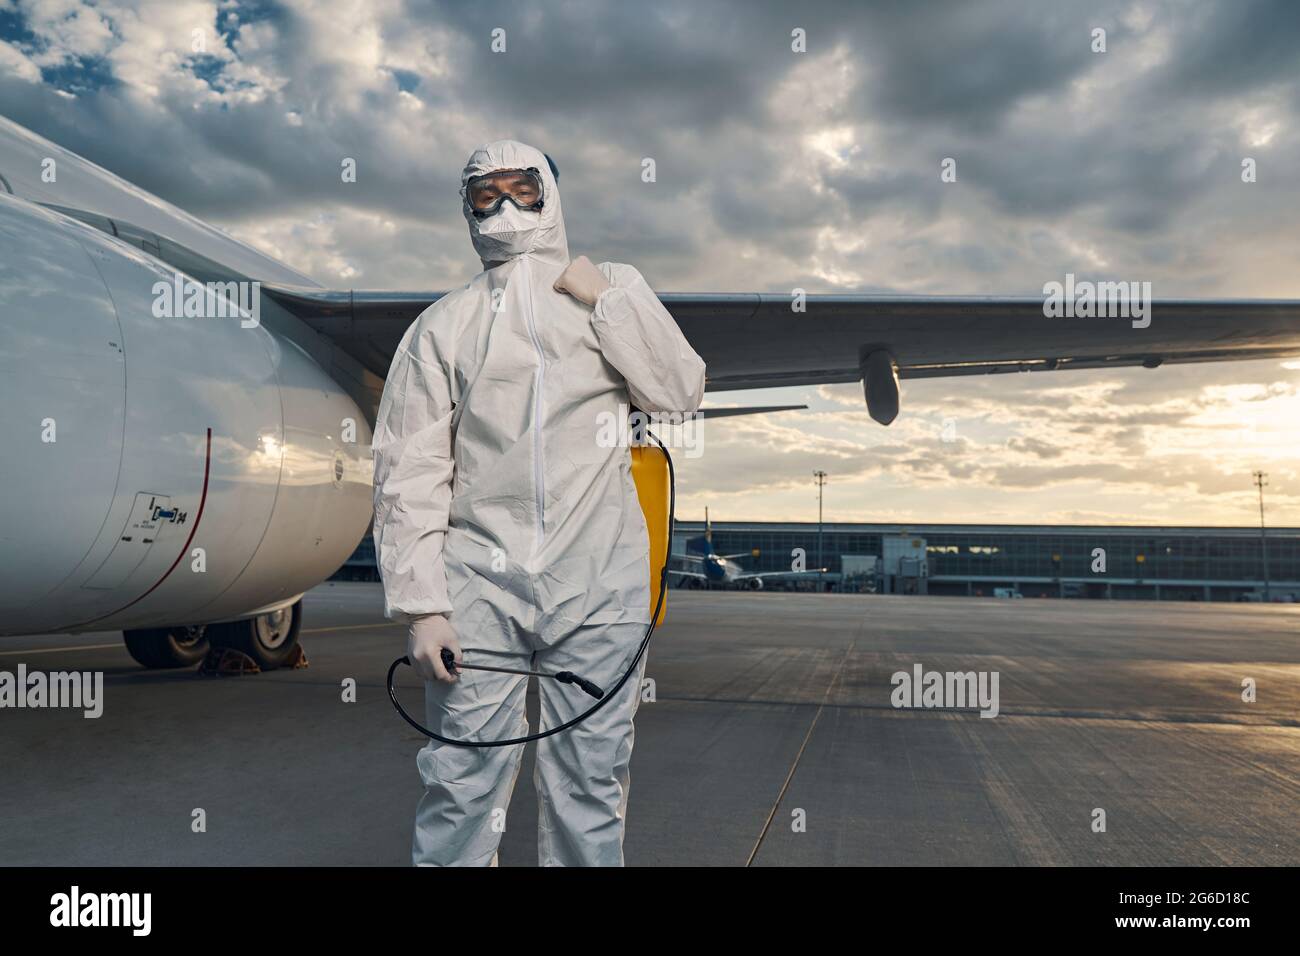 Man in a hazmat suit standing at the airdrome Stock Photo